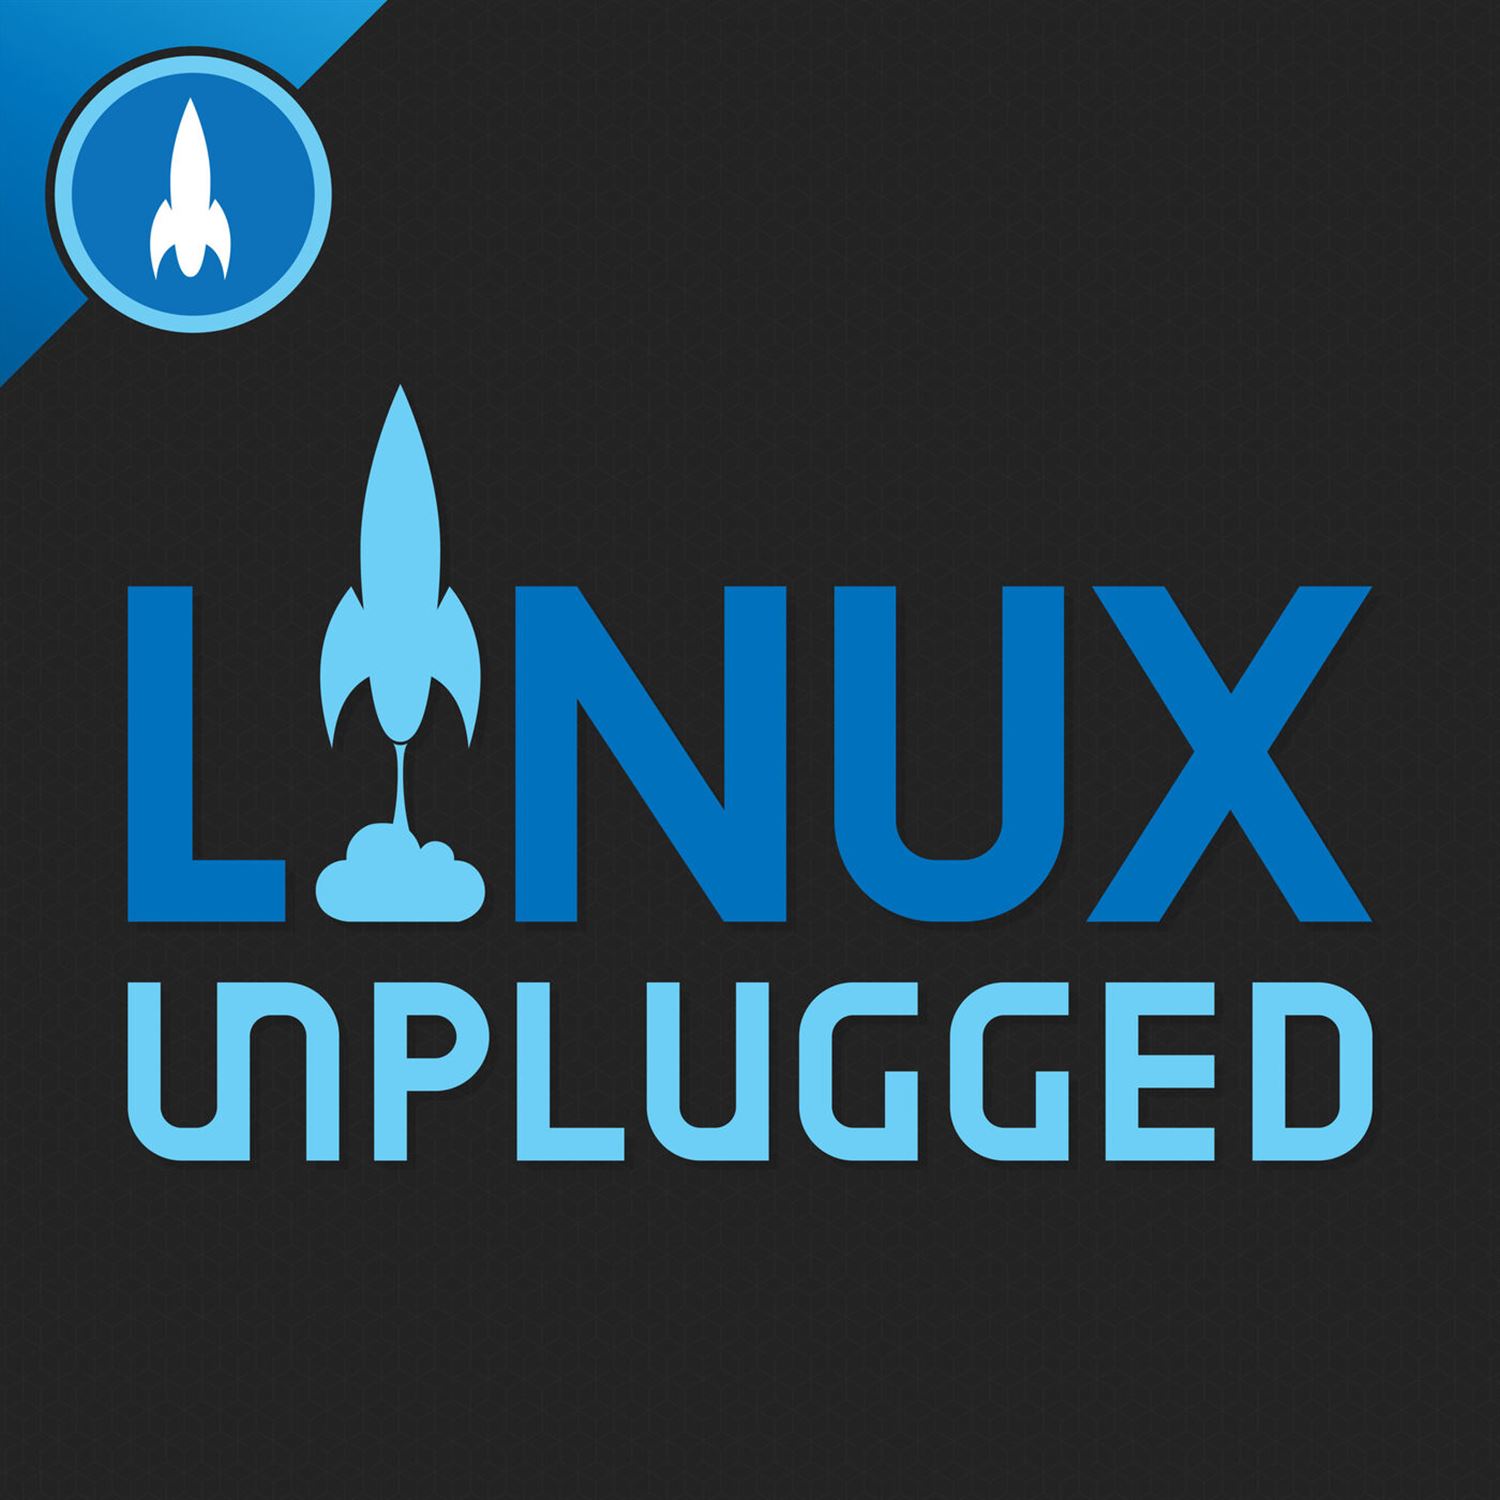 Linux Unplugged, one way boost messages and my dislike of texting